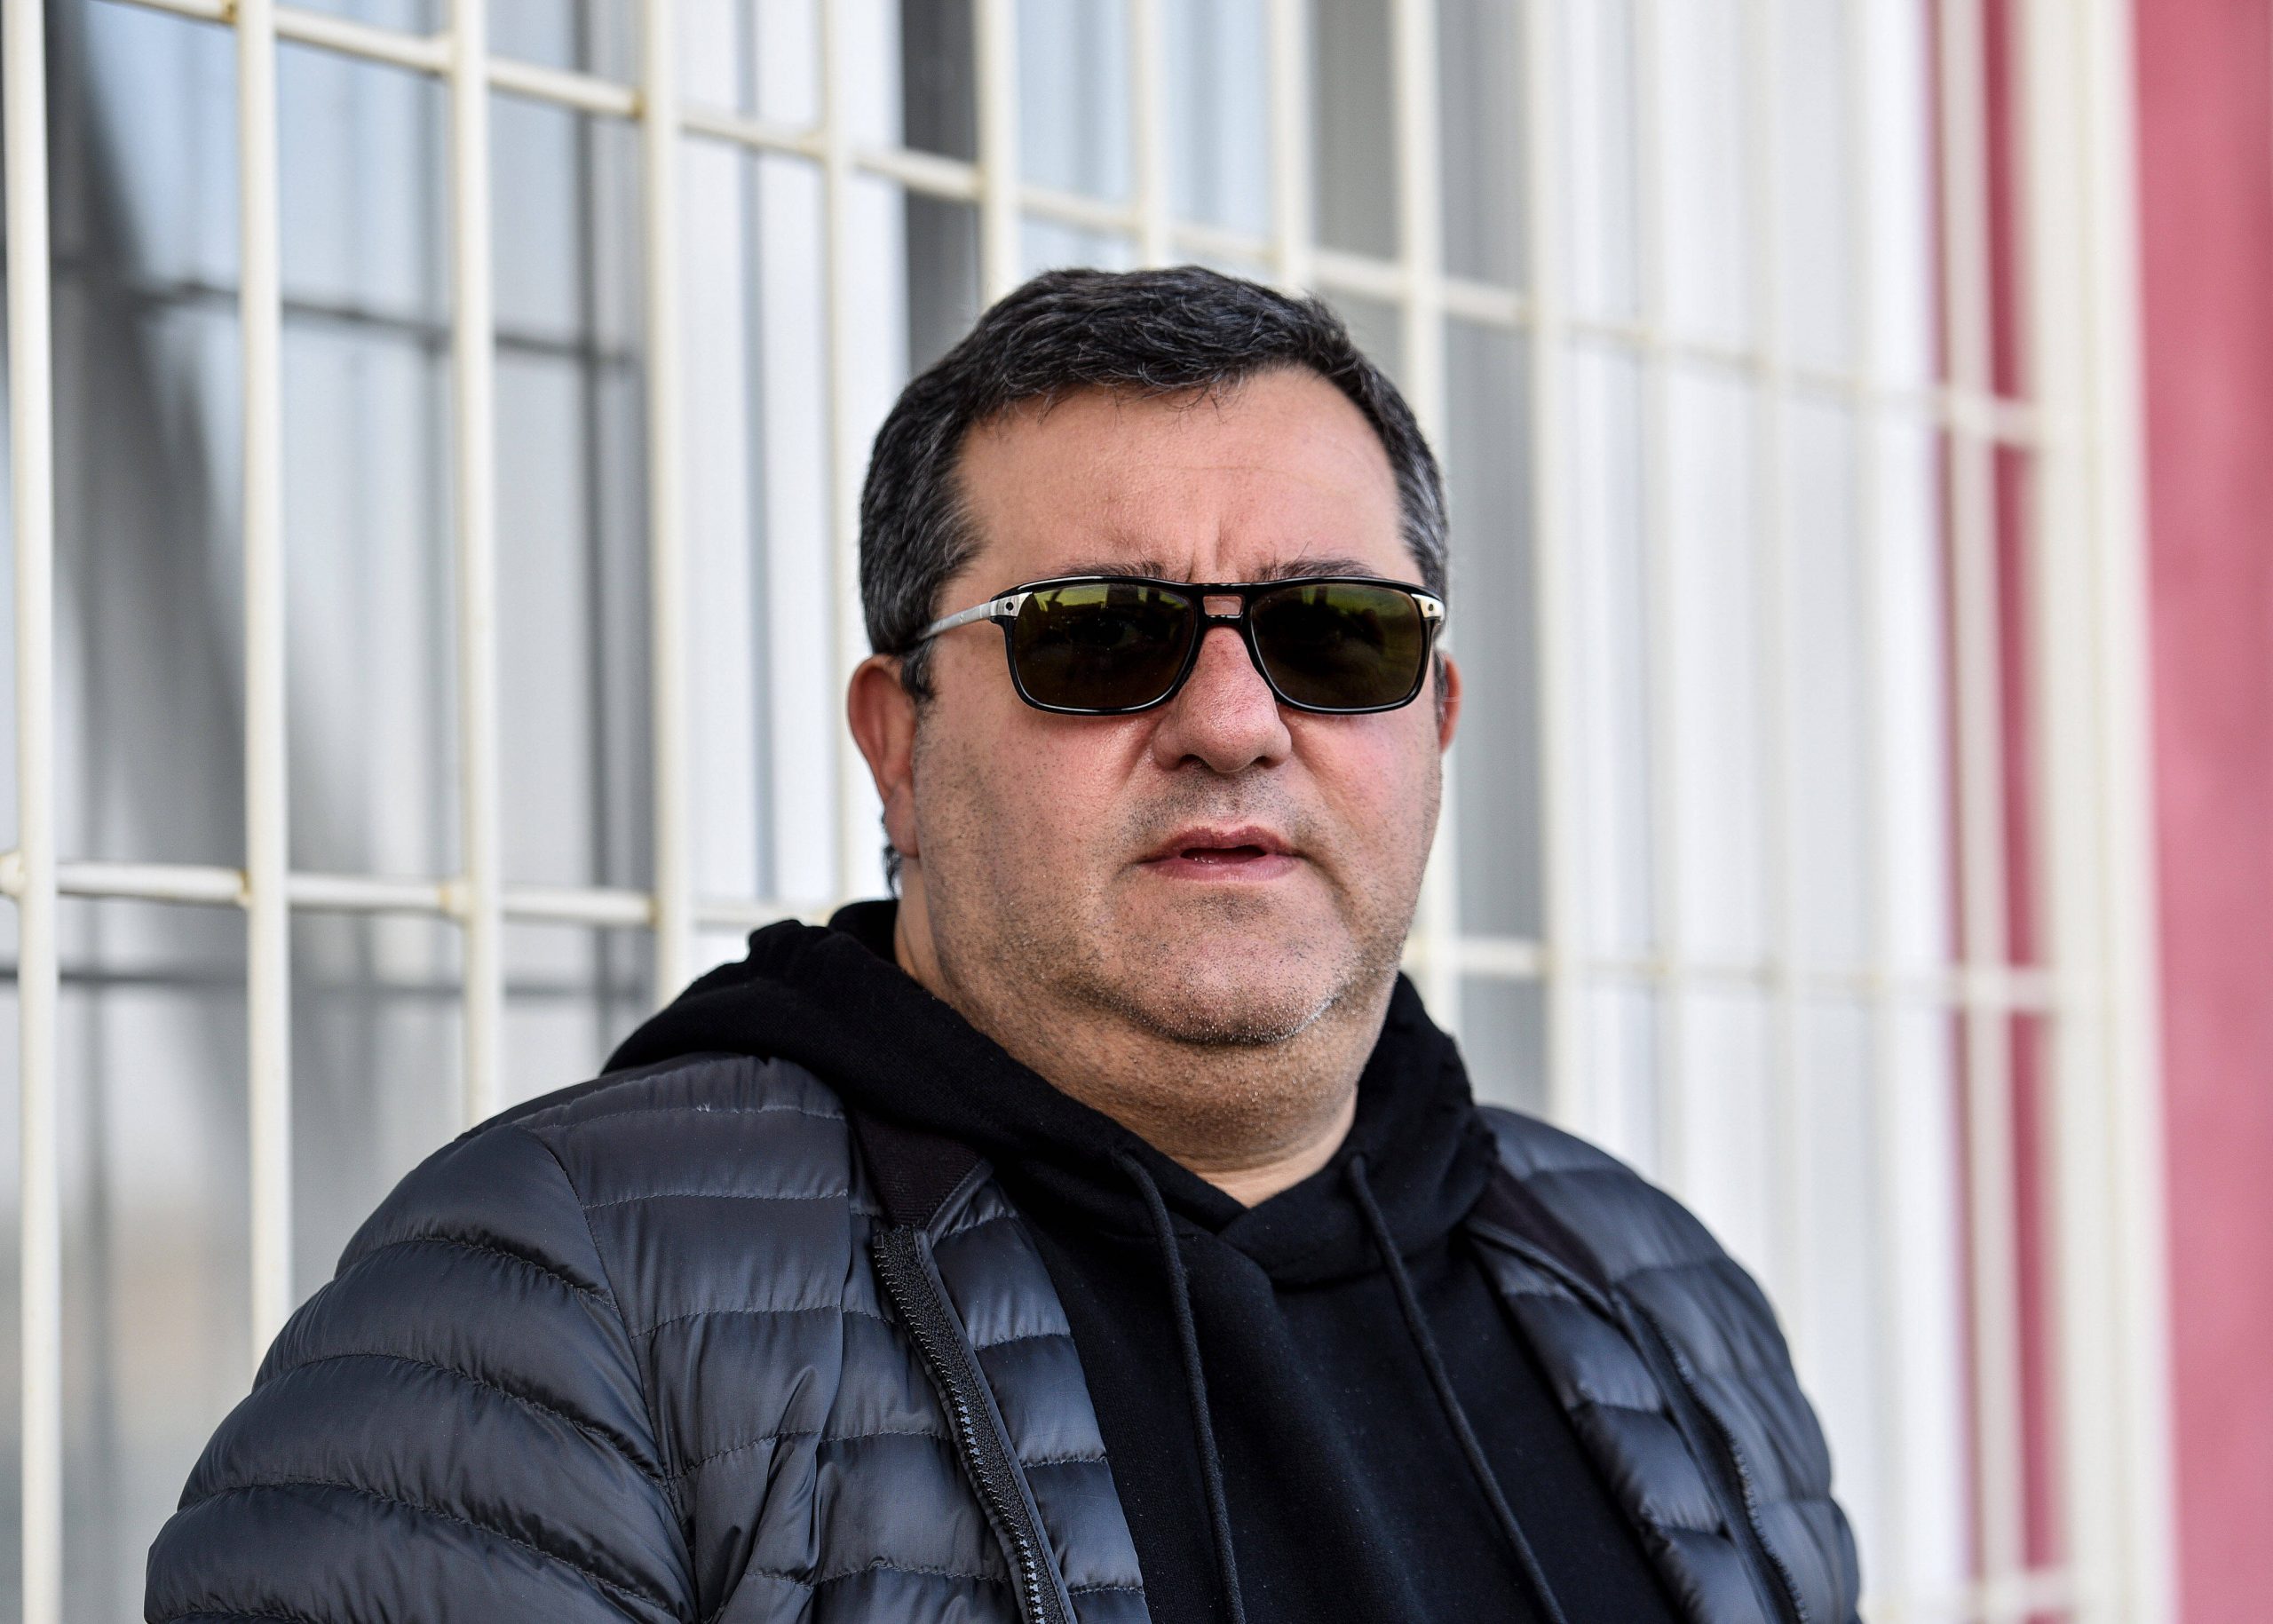 Mino Raiola rubbishes report of pocketing £41m from Manchester United for Paul Pogba.